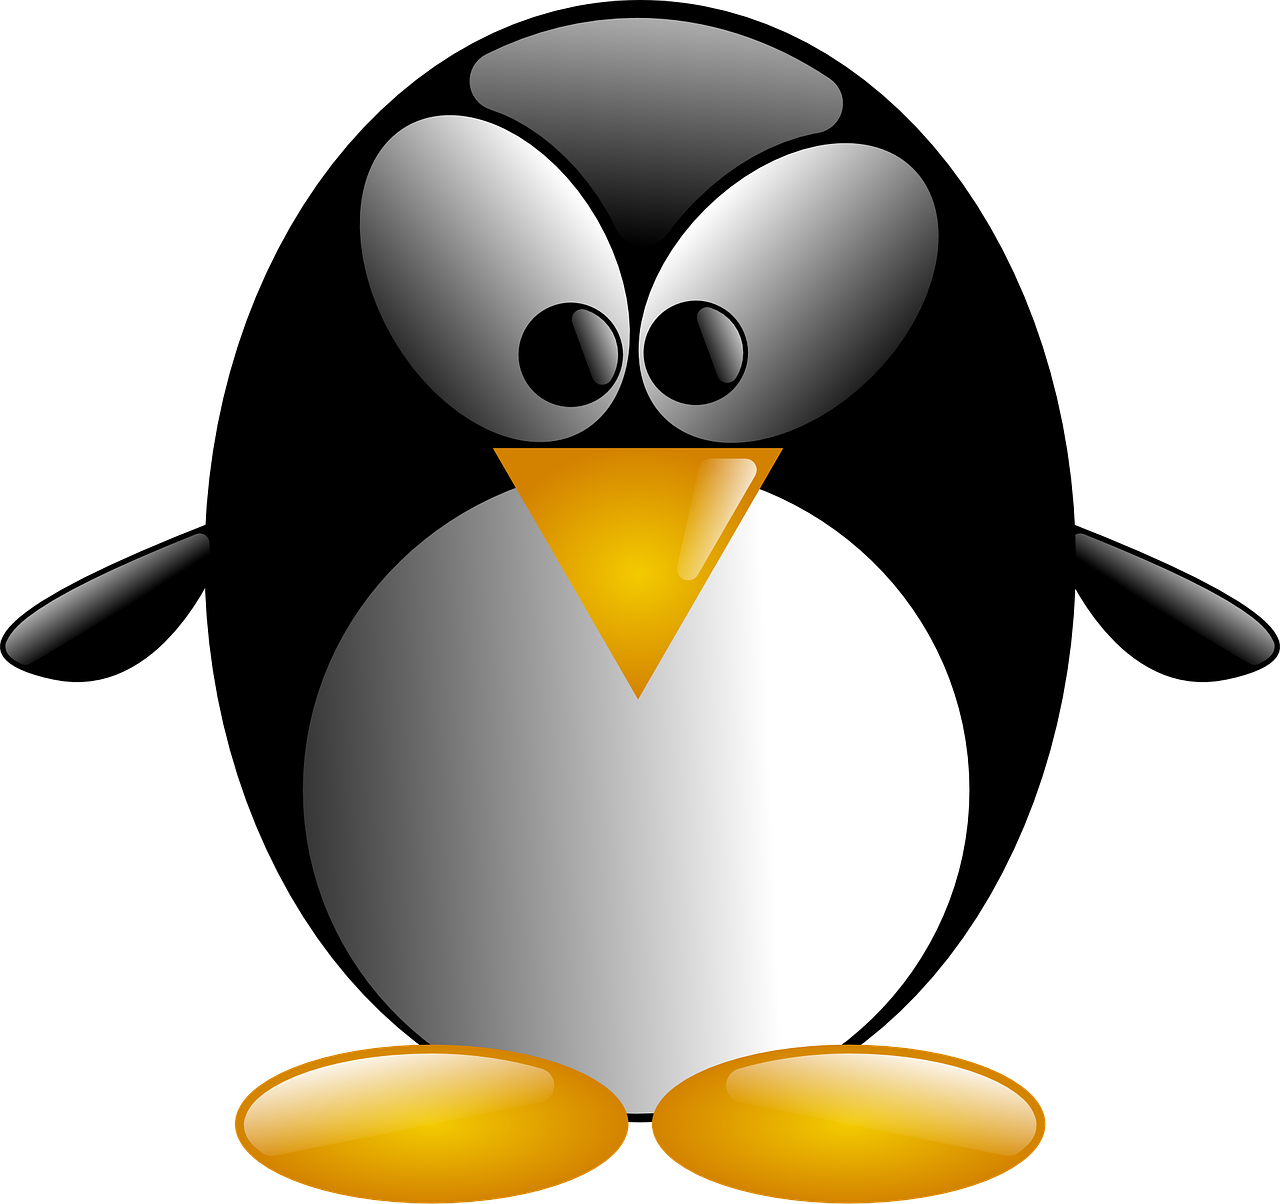 a black and white penguin with a yellow beak, by Andrei Kolkoutine, pixabay, computer art, shiny silver, processor, cartoonish cute, with a black background